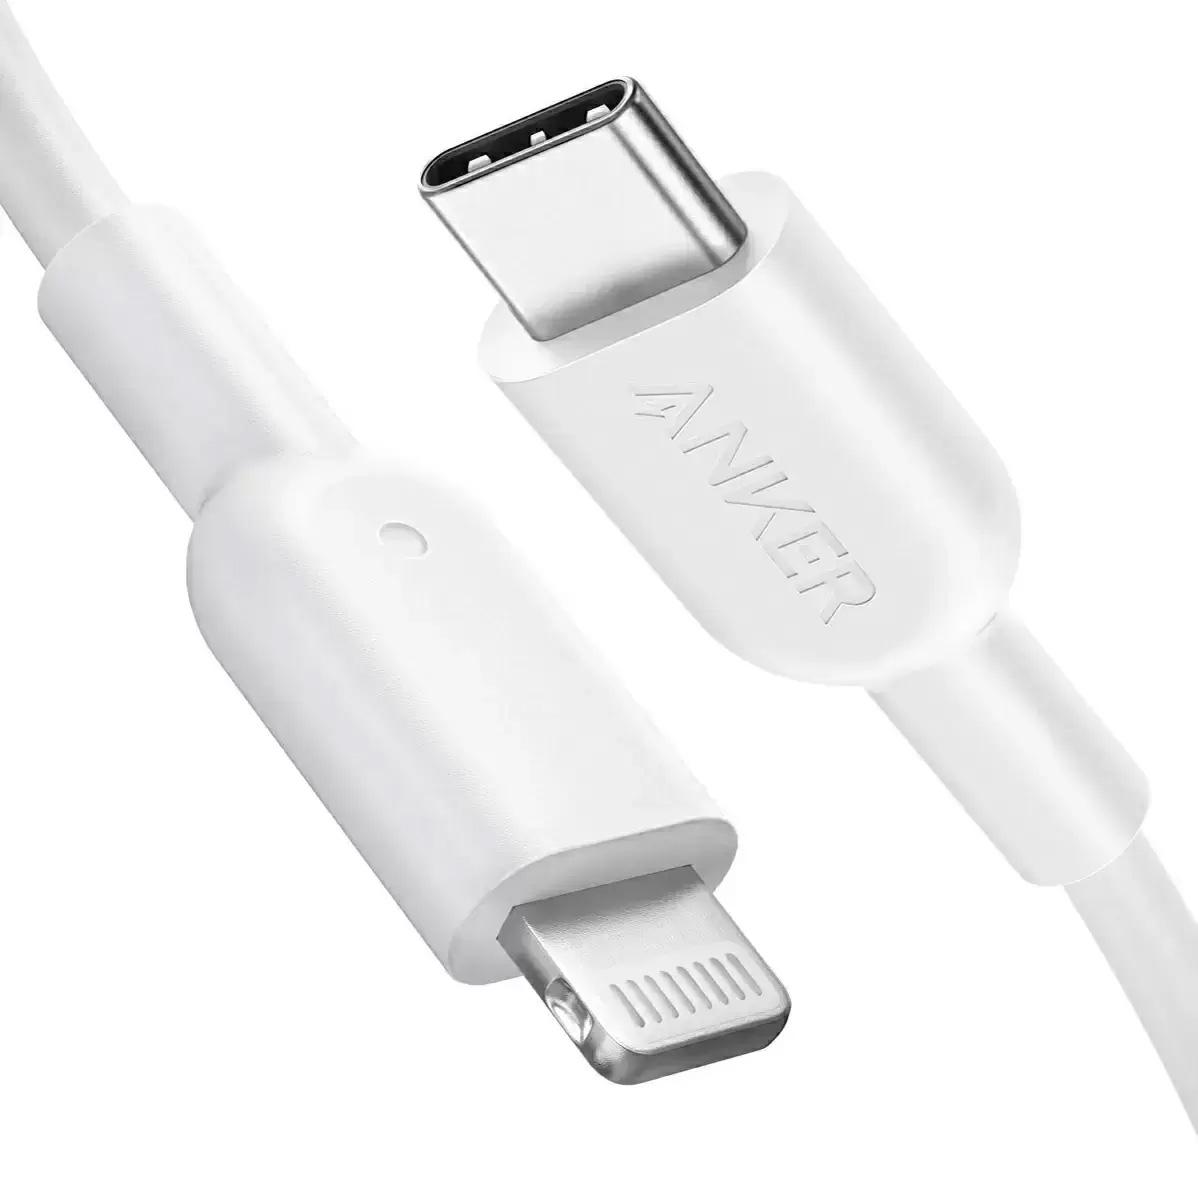 Apple Anker Powerline II MFi Certified USB C to Lightning Cable for $9.99